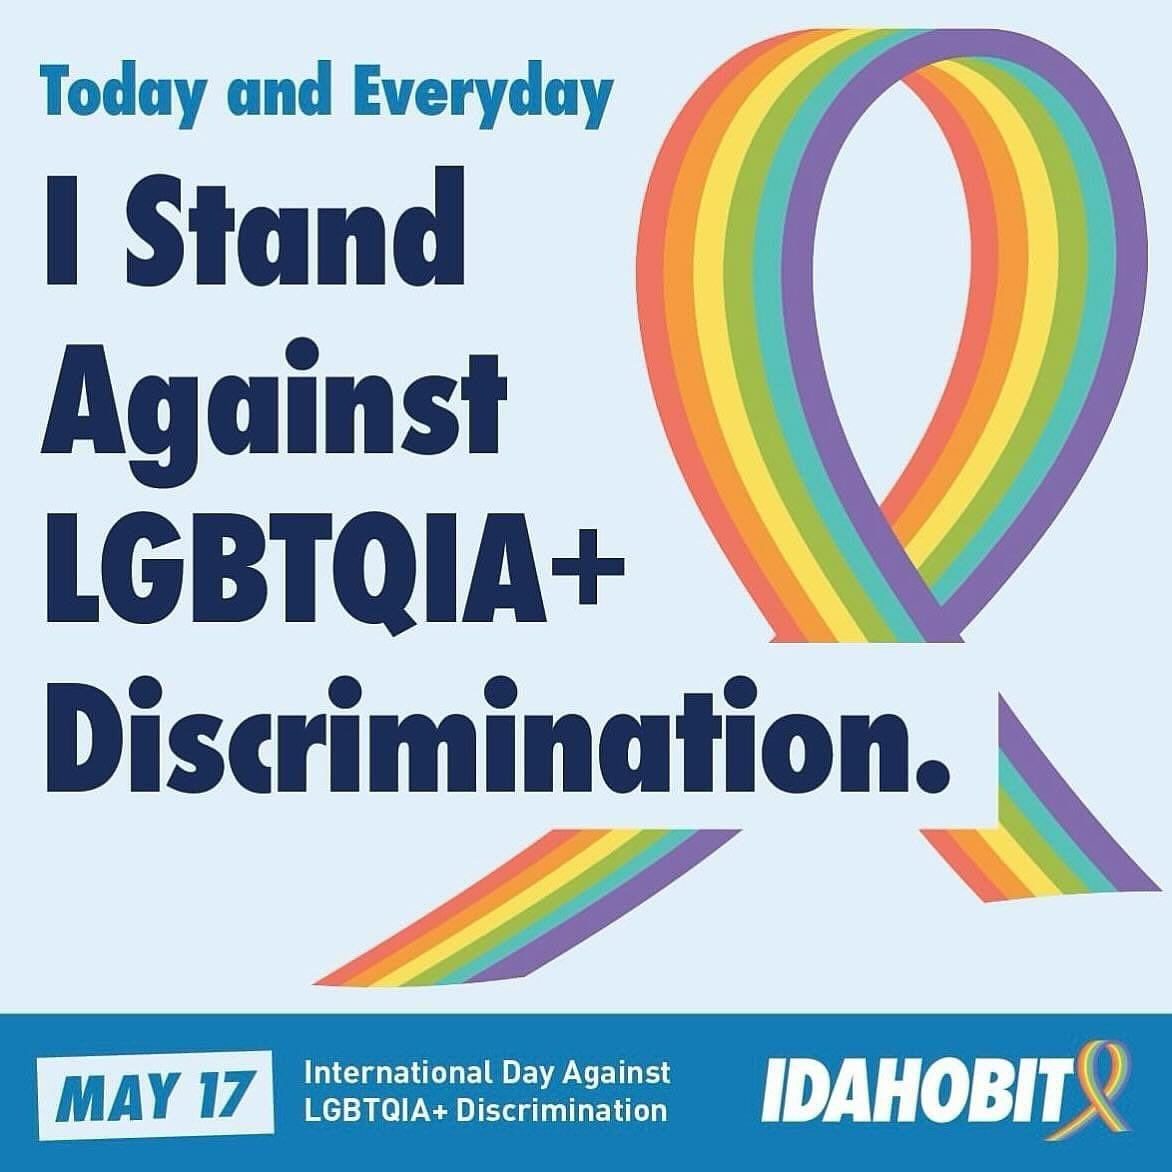 Happy IDAHOBIT Day! The world is a better and brighter place when we bring everyone along with us. ❤️🧡💛💚🩵💜
#idahobitday🏳️&zwj;🌈 #idahobit2024 #loveislove🌈